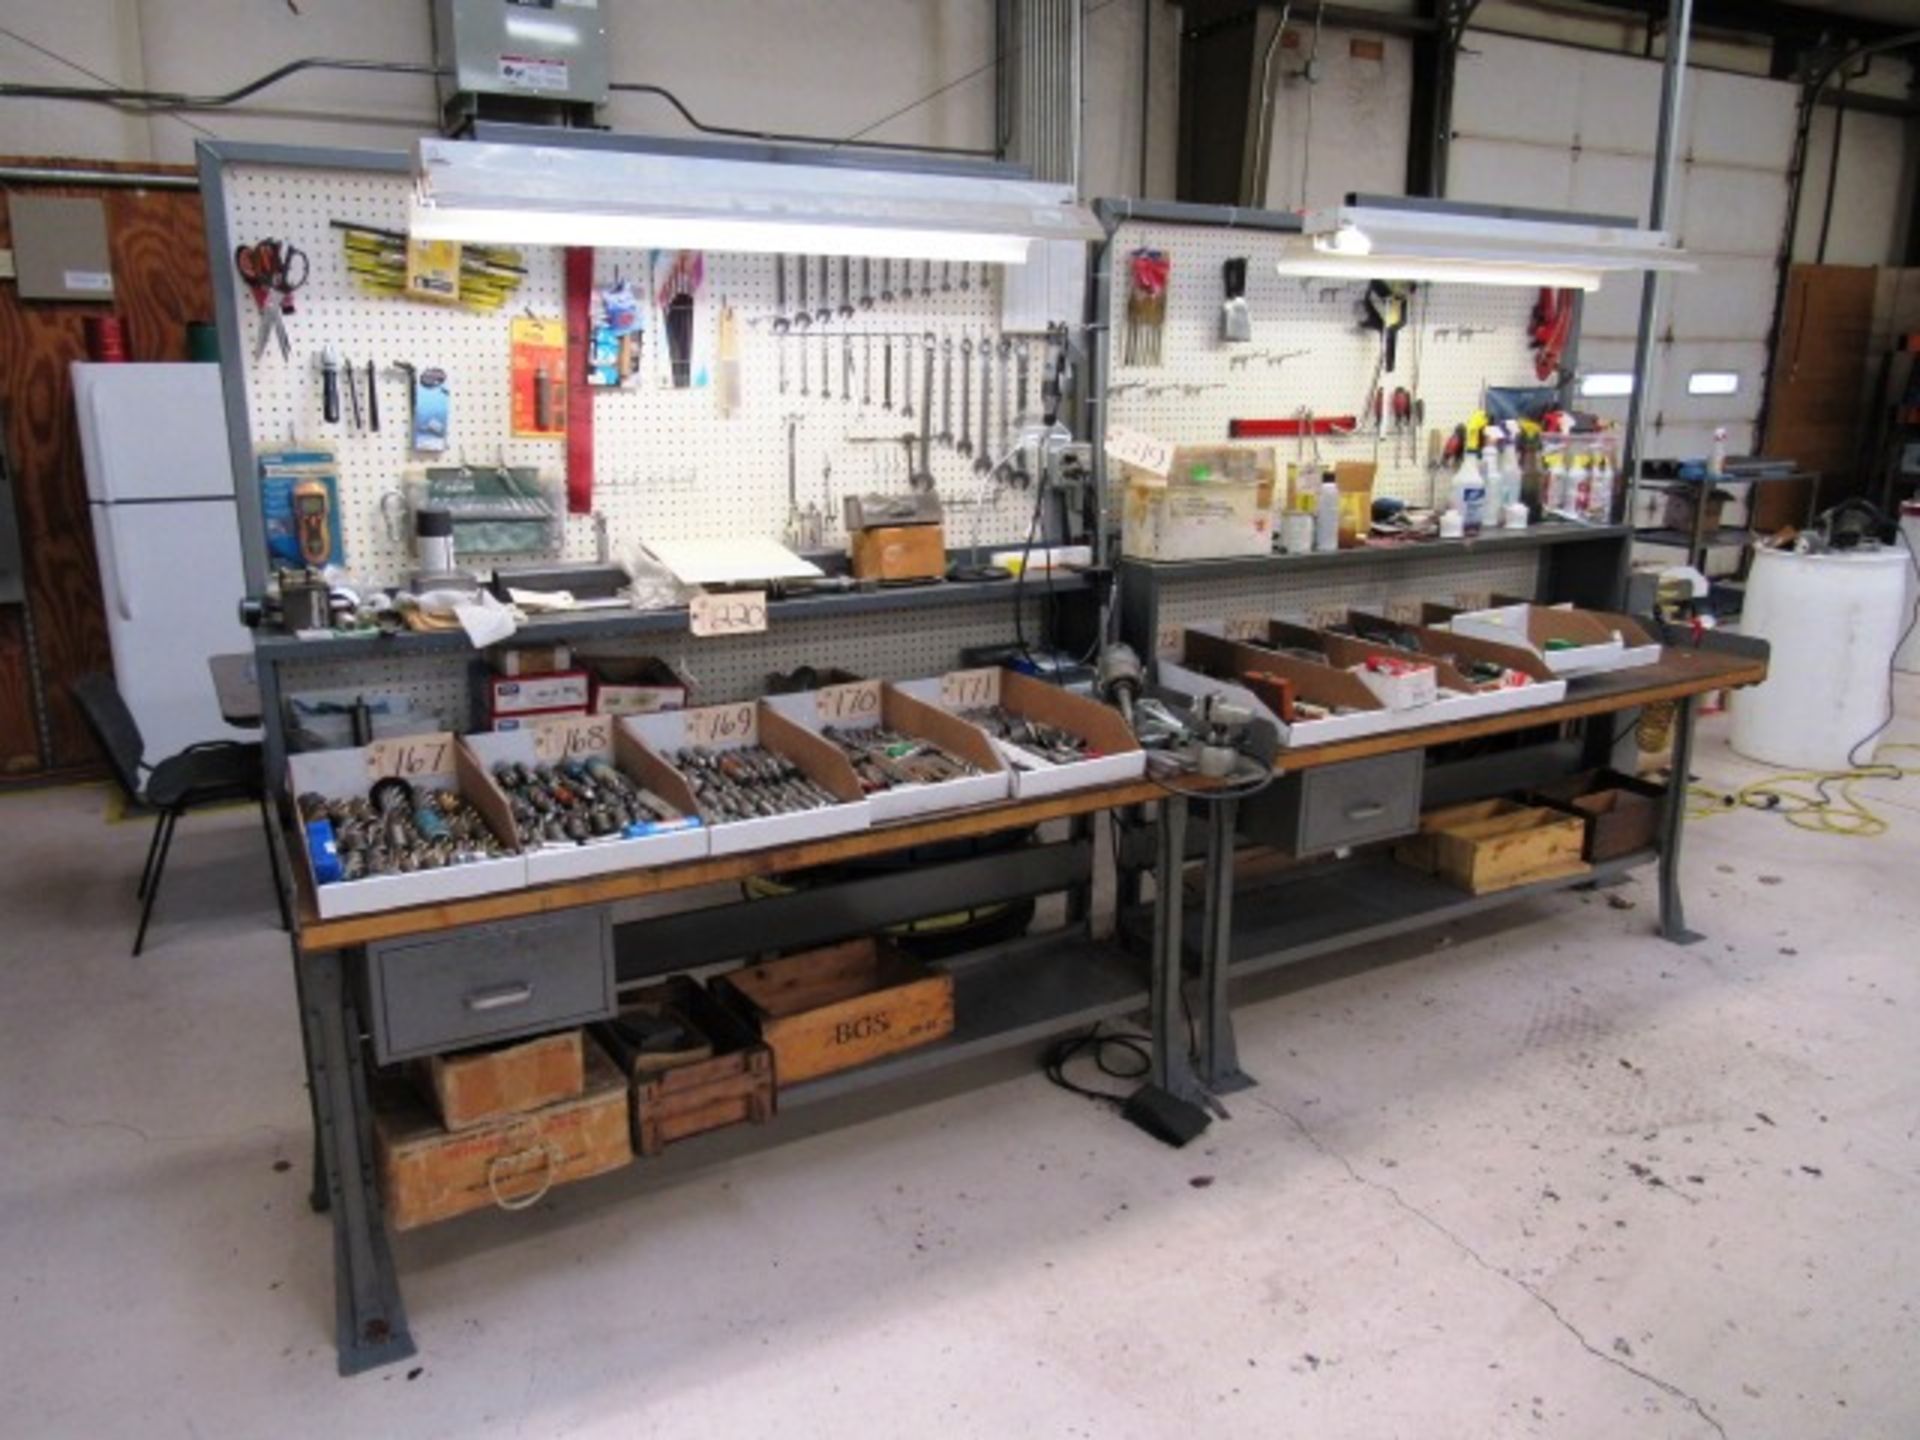 (2) Workbenches (no lots or foreman drill)